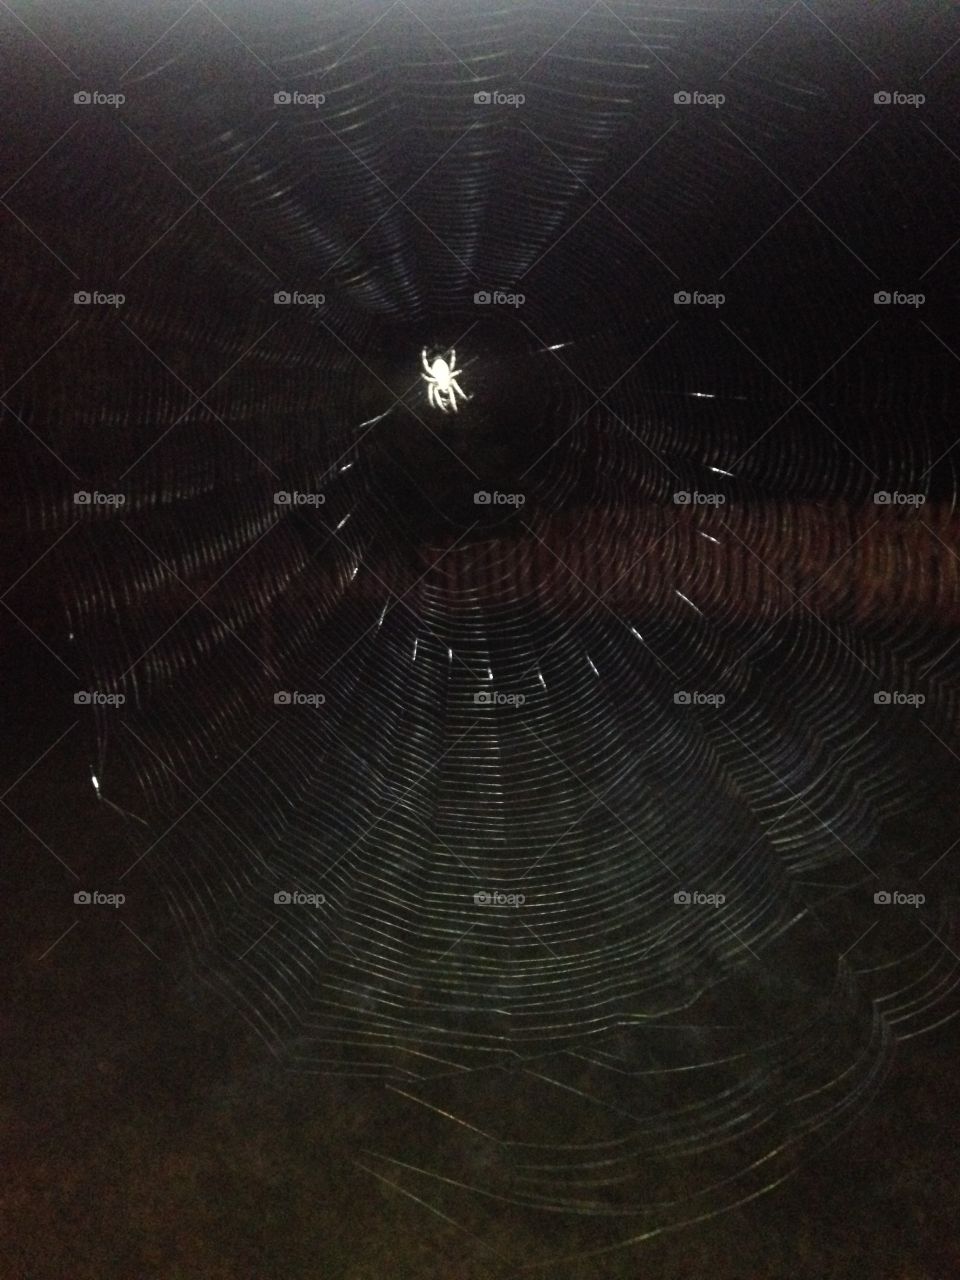 Spider web I thought was pretty awesome 